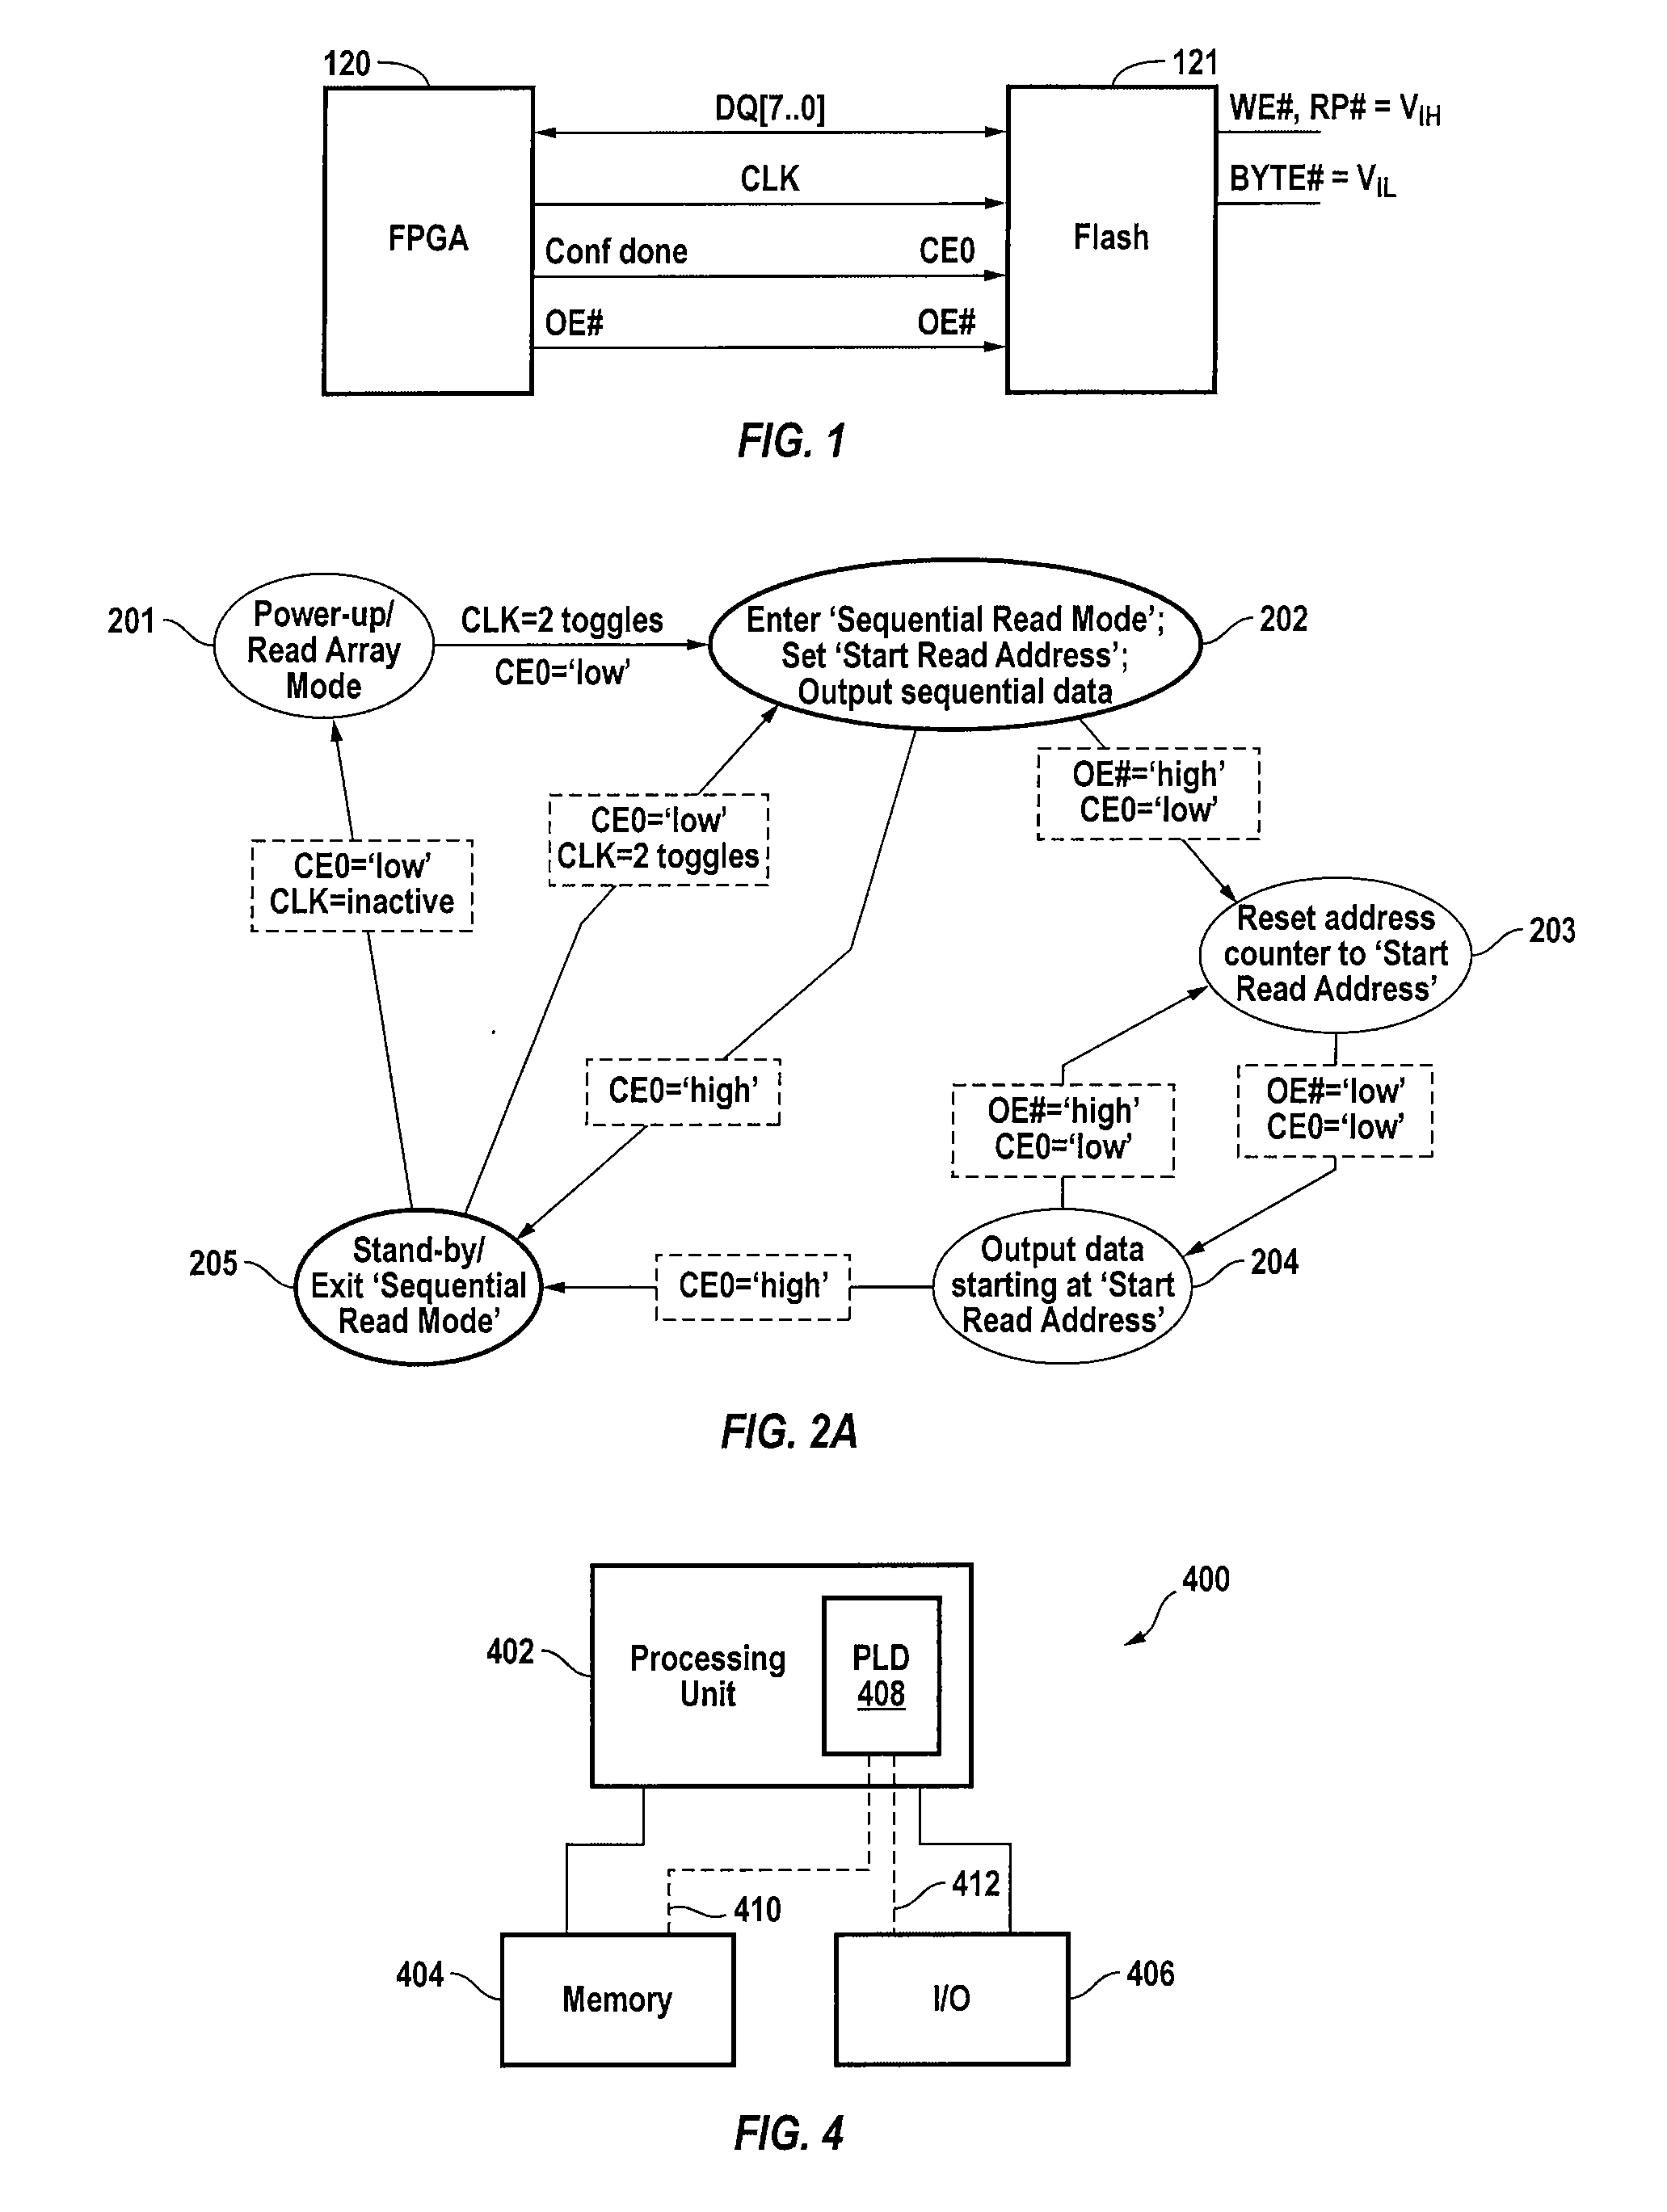 Techniques for sequentially transferring data from a memory device through a parallel interface